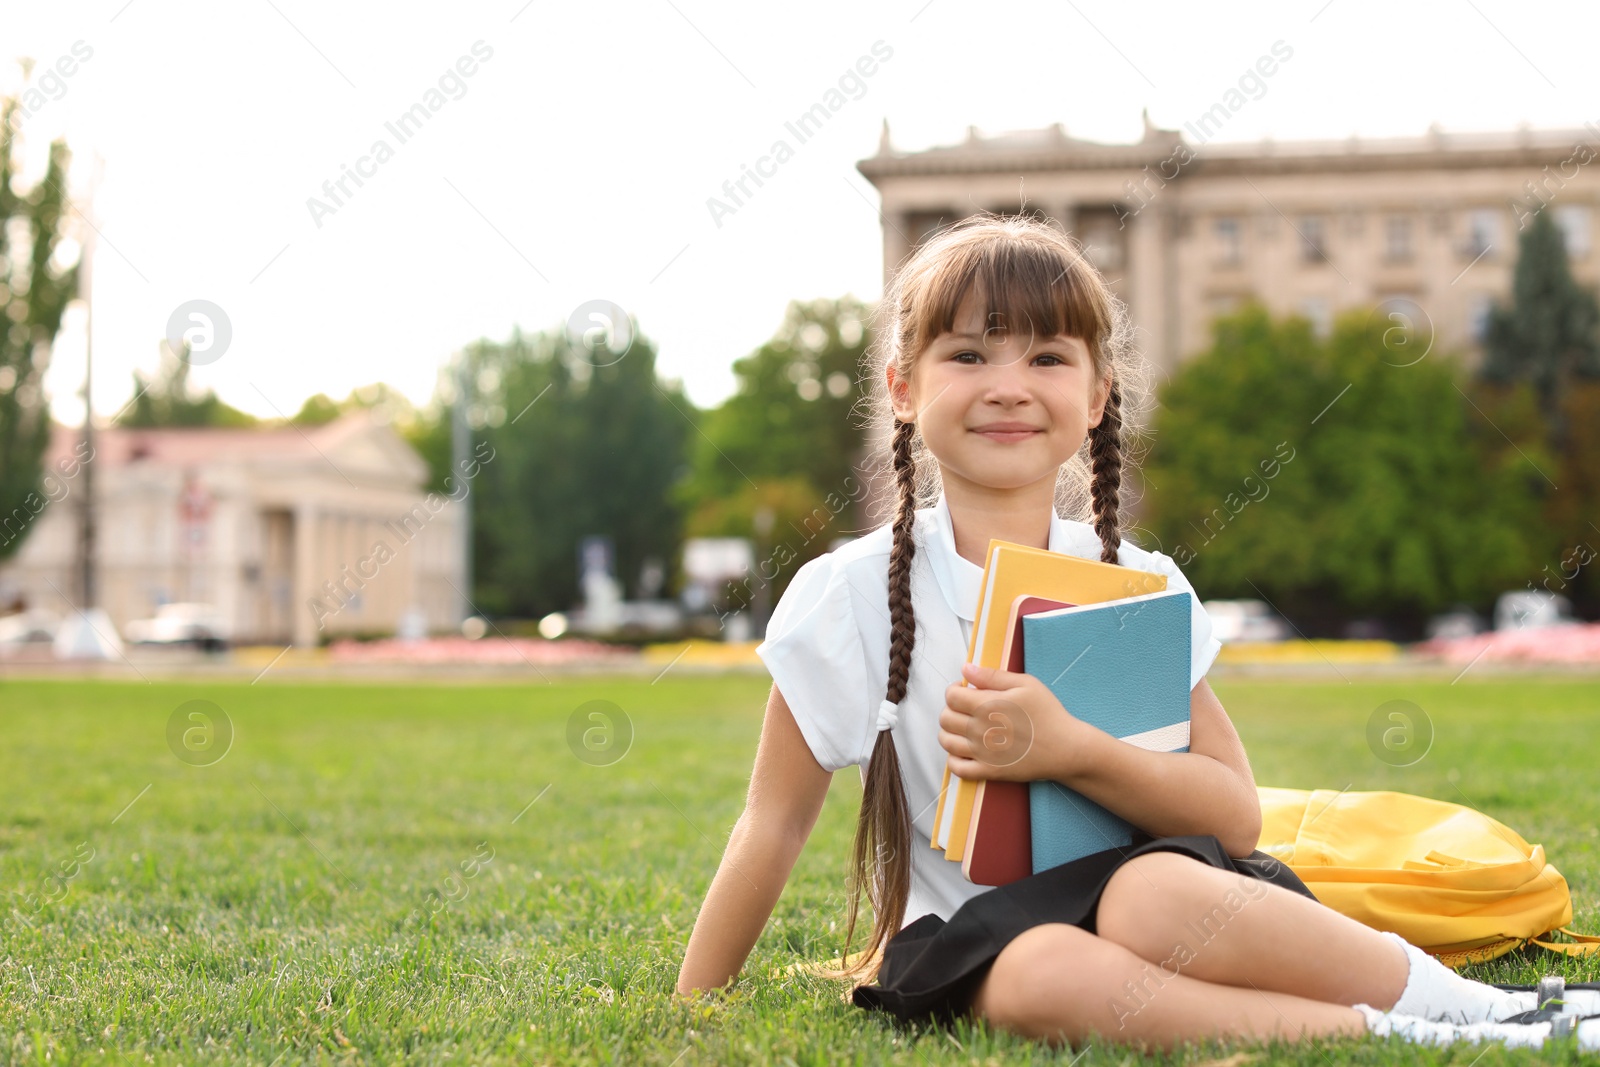 Photo of Schoolgirl with stationery sitting on grass outdoors